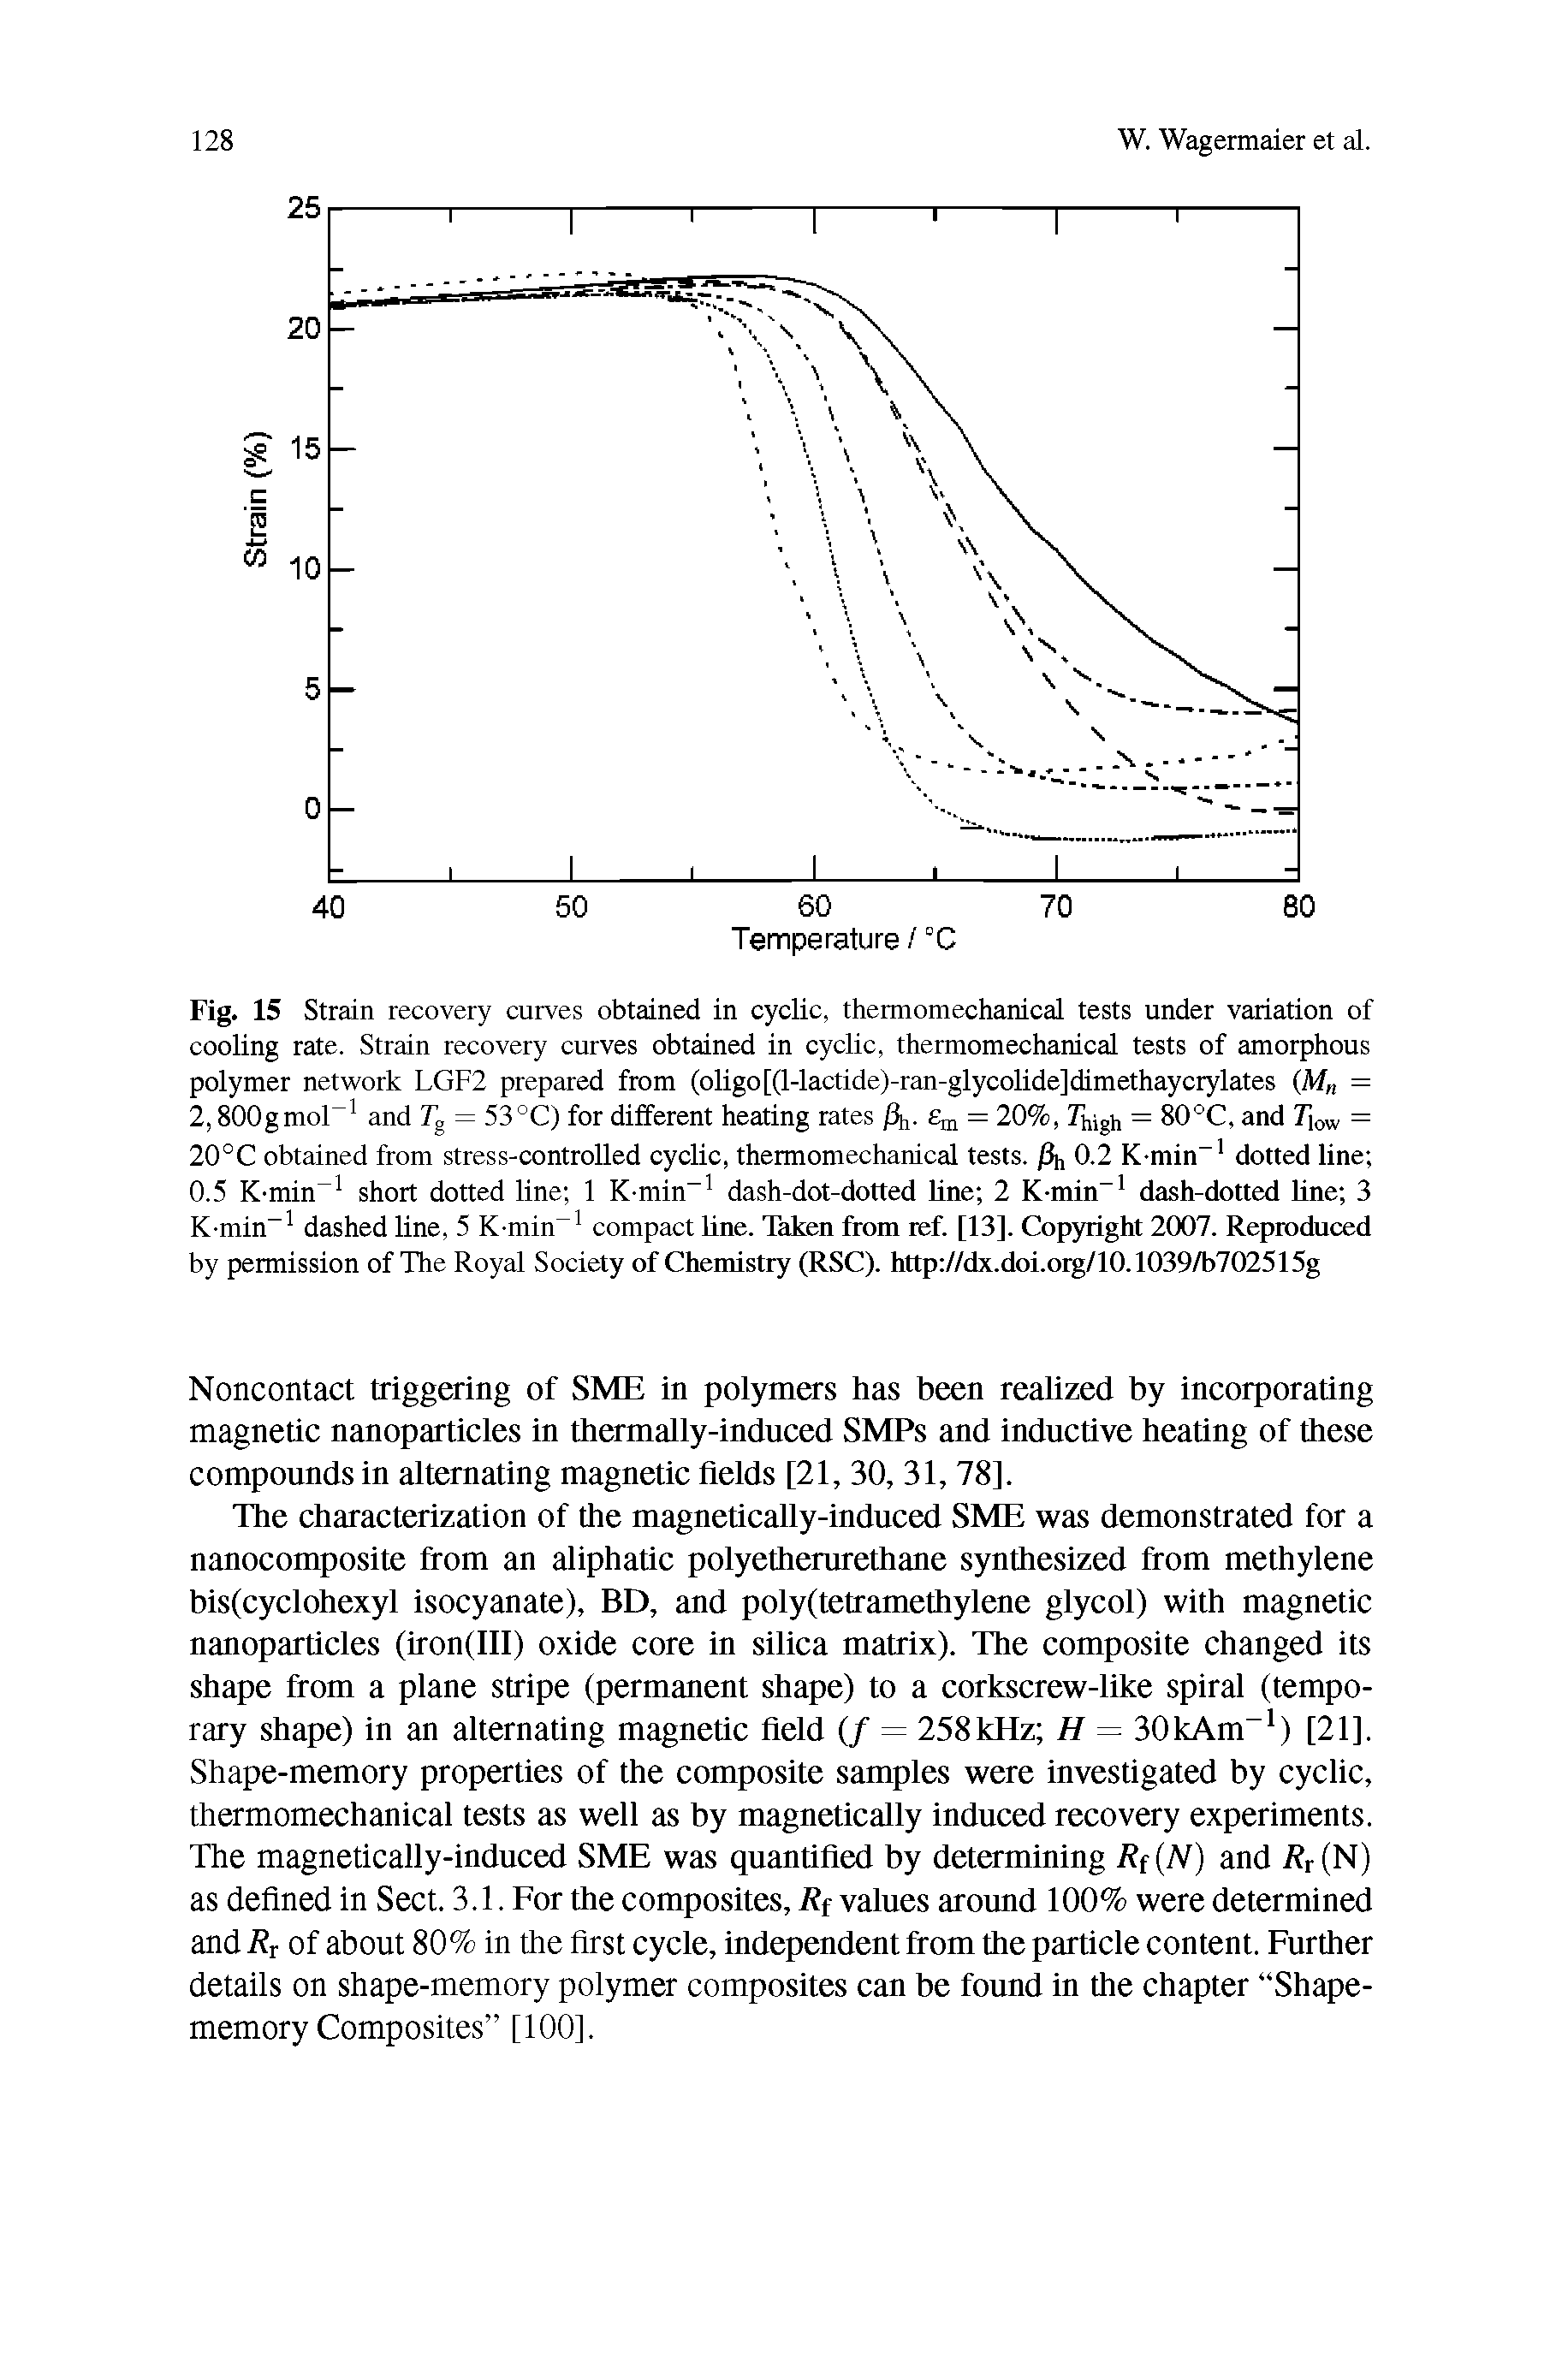 Fig. 15 Strain recovery curves obtained in cyclic, thermomechanical tests under variation of cooling rate. Strain recovery curves obtained in cyclic, thermomechanical tests of amorphous polymer network LGF2 prepared from (oligo[(l-lactide)-ran-glycolide]dimethaycrylates (M = 2,800gmol and Fg = 53°C) for different heating rates fit,. e = 20%, Thigh = 80 C, and Tiow = 20°C obtained from stress-controlled cyclic, thermomechanical tests. jSh 0.2 K min dotted line 0.5 K min short dotted line 1 K min dash-dot-dotted line 2 K-min dash-dotted line 3 K min dashed line, 5 K min compact line. Taken from ref. [13]. Copyright 2007. Reproduced by permission of The Royal Society of Chemistry (RSC). http //dx.doi.oig/10.1039/b702515g...